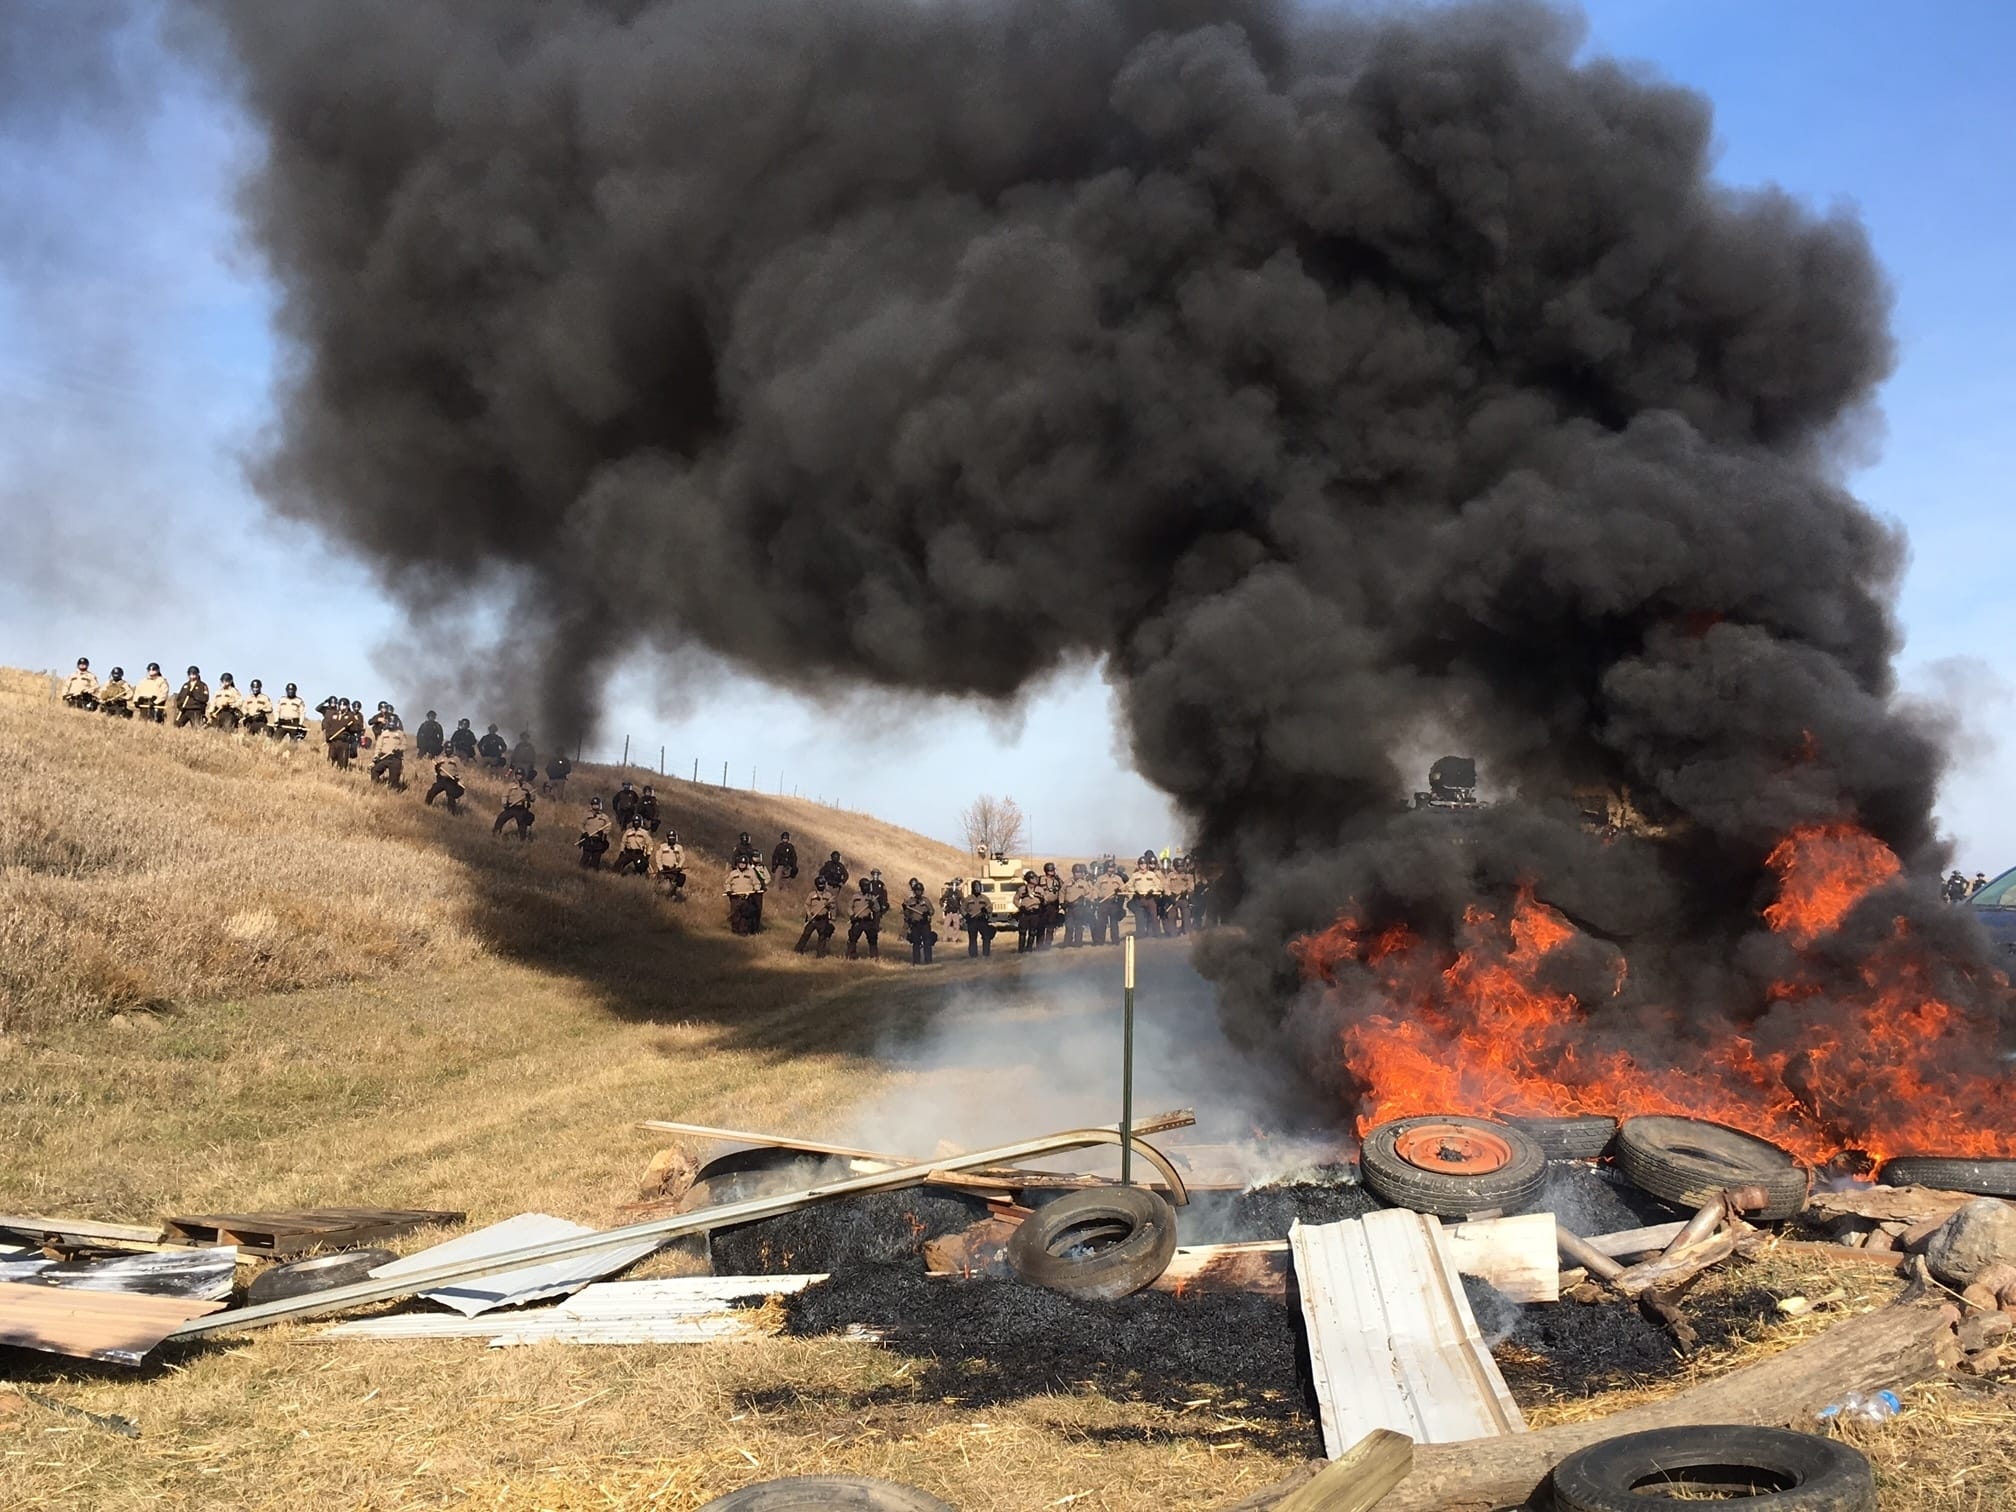 Tires burn as armed soldiers and law enforcement officers stand in formation on Thursday, Oct. 27, 2016, to force Dakota Access pipeline protesters off private land where they had camped to block construction. The pipeline is to carry oil from western North Dakota through South Dakota and Iowa to an existing pipeline in Patoka, Ill.